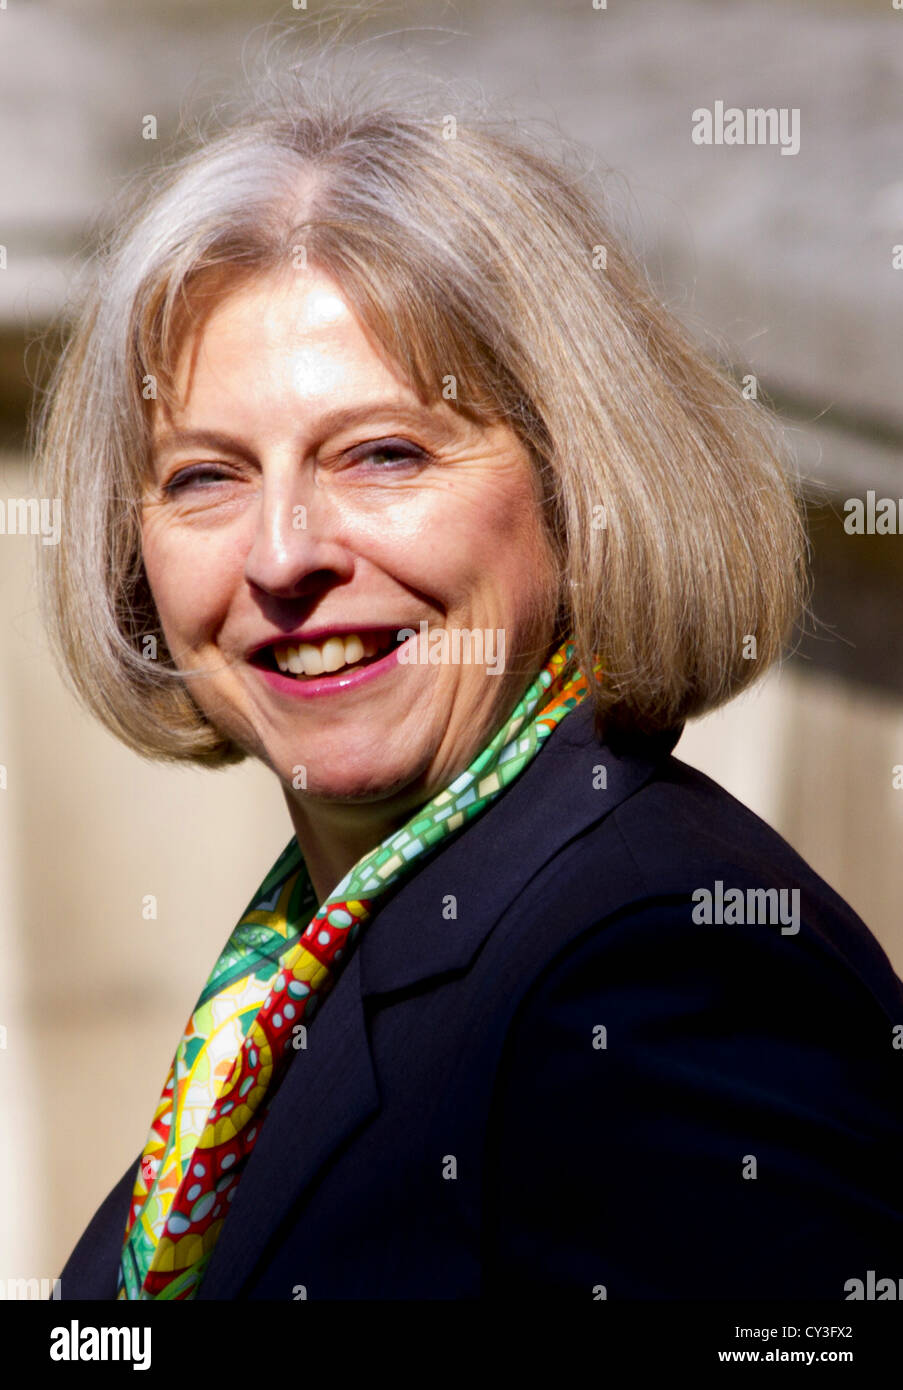 London, UK. 29th 2012. (Pictured) Home Secretary Theresa May arrives at the Leveson Inquiry at the Royal Court of justice London Stock Photo